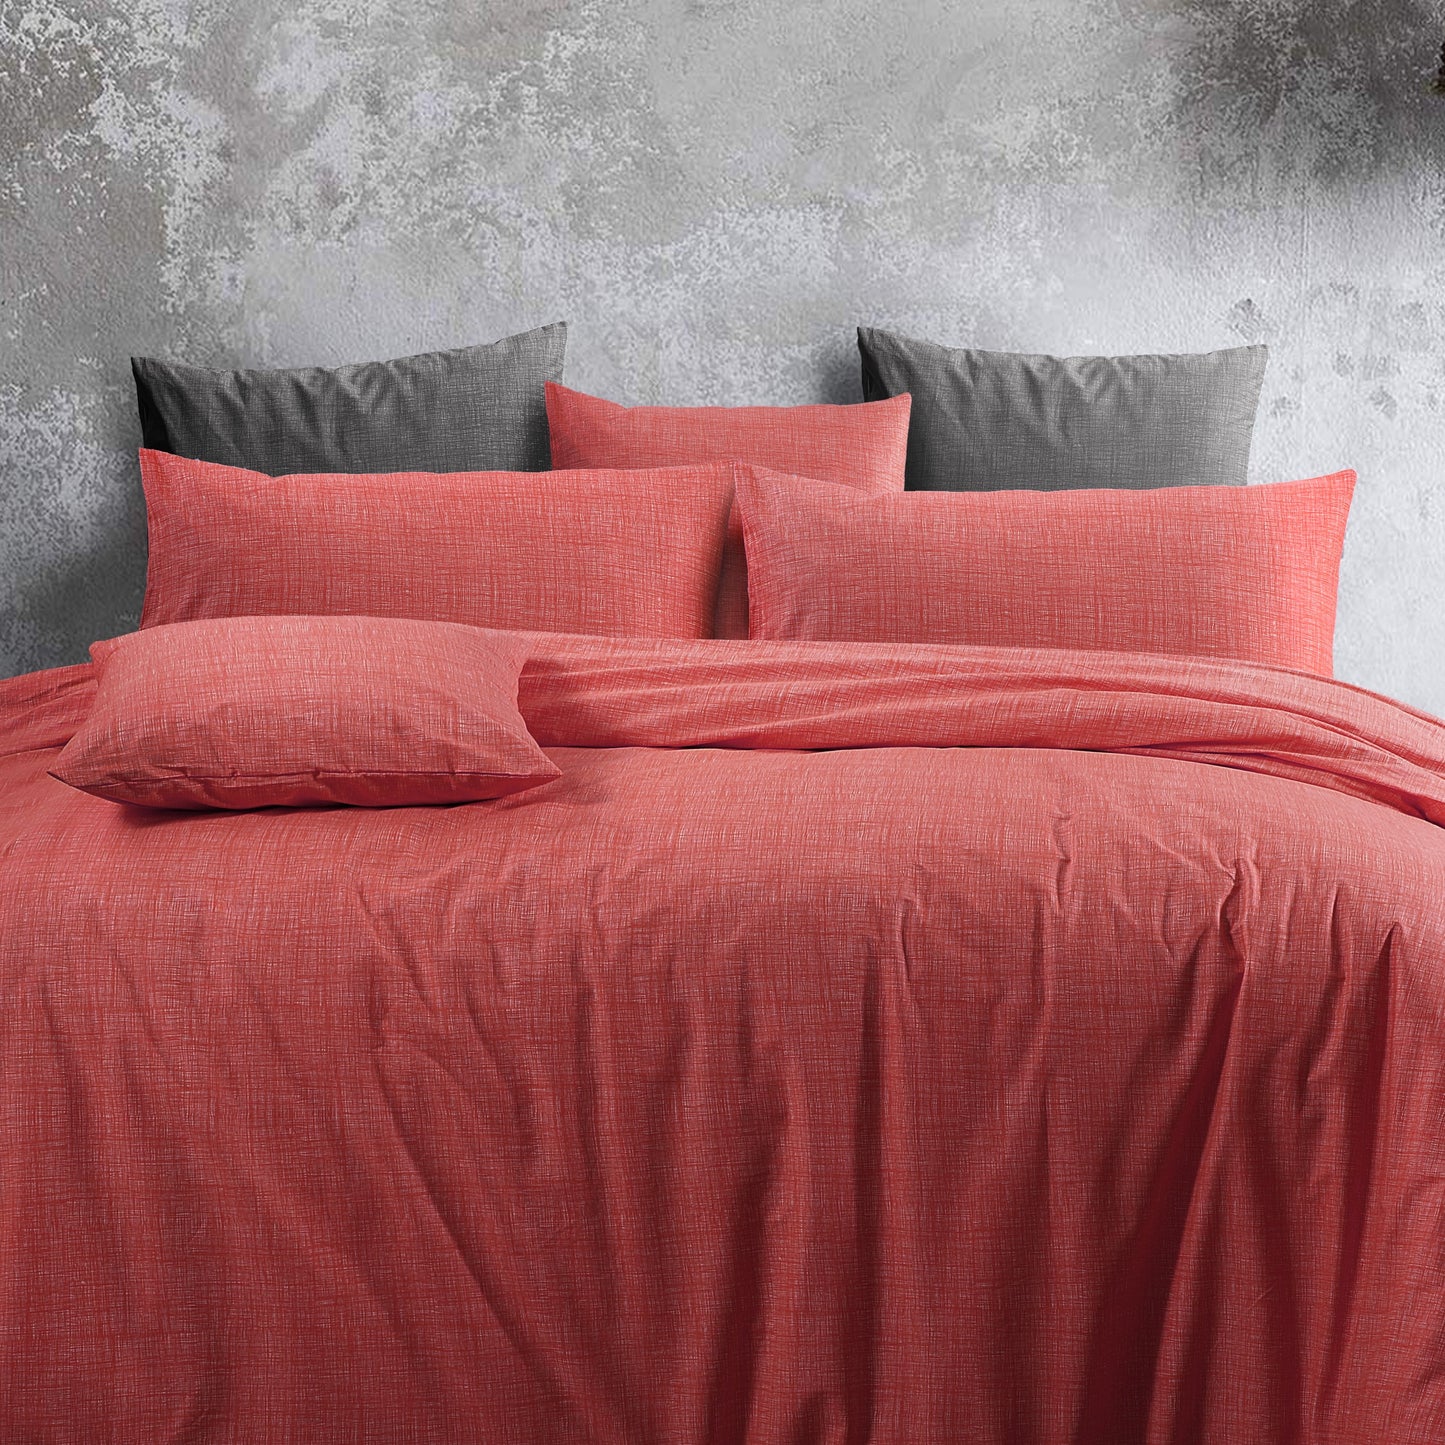 100 % Cotton Doona Cover Textured Print with Extra Standard Pillowcases | Living Coral 